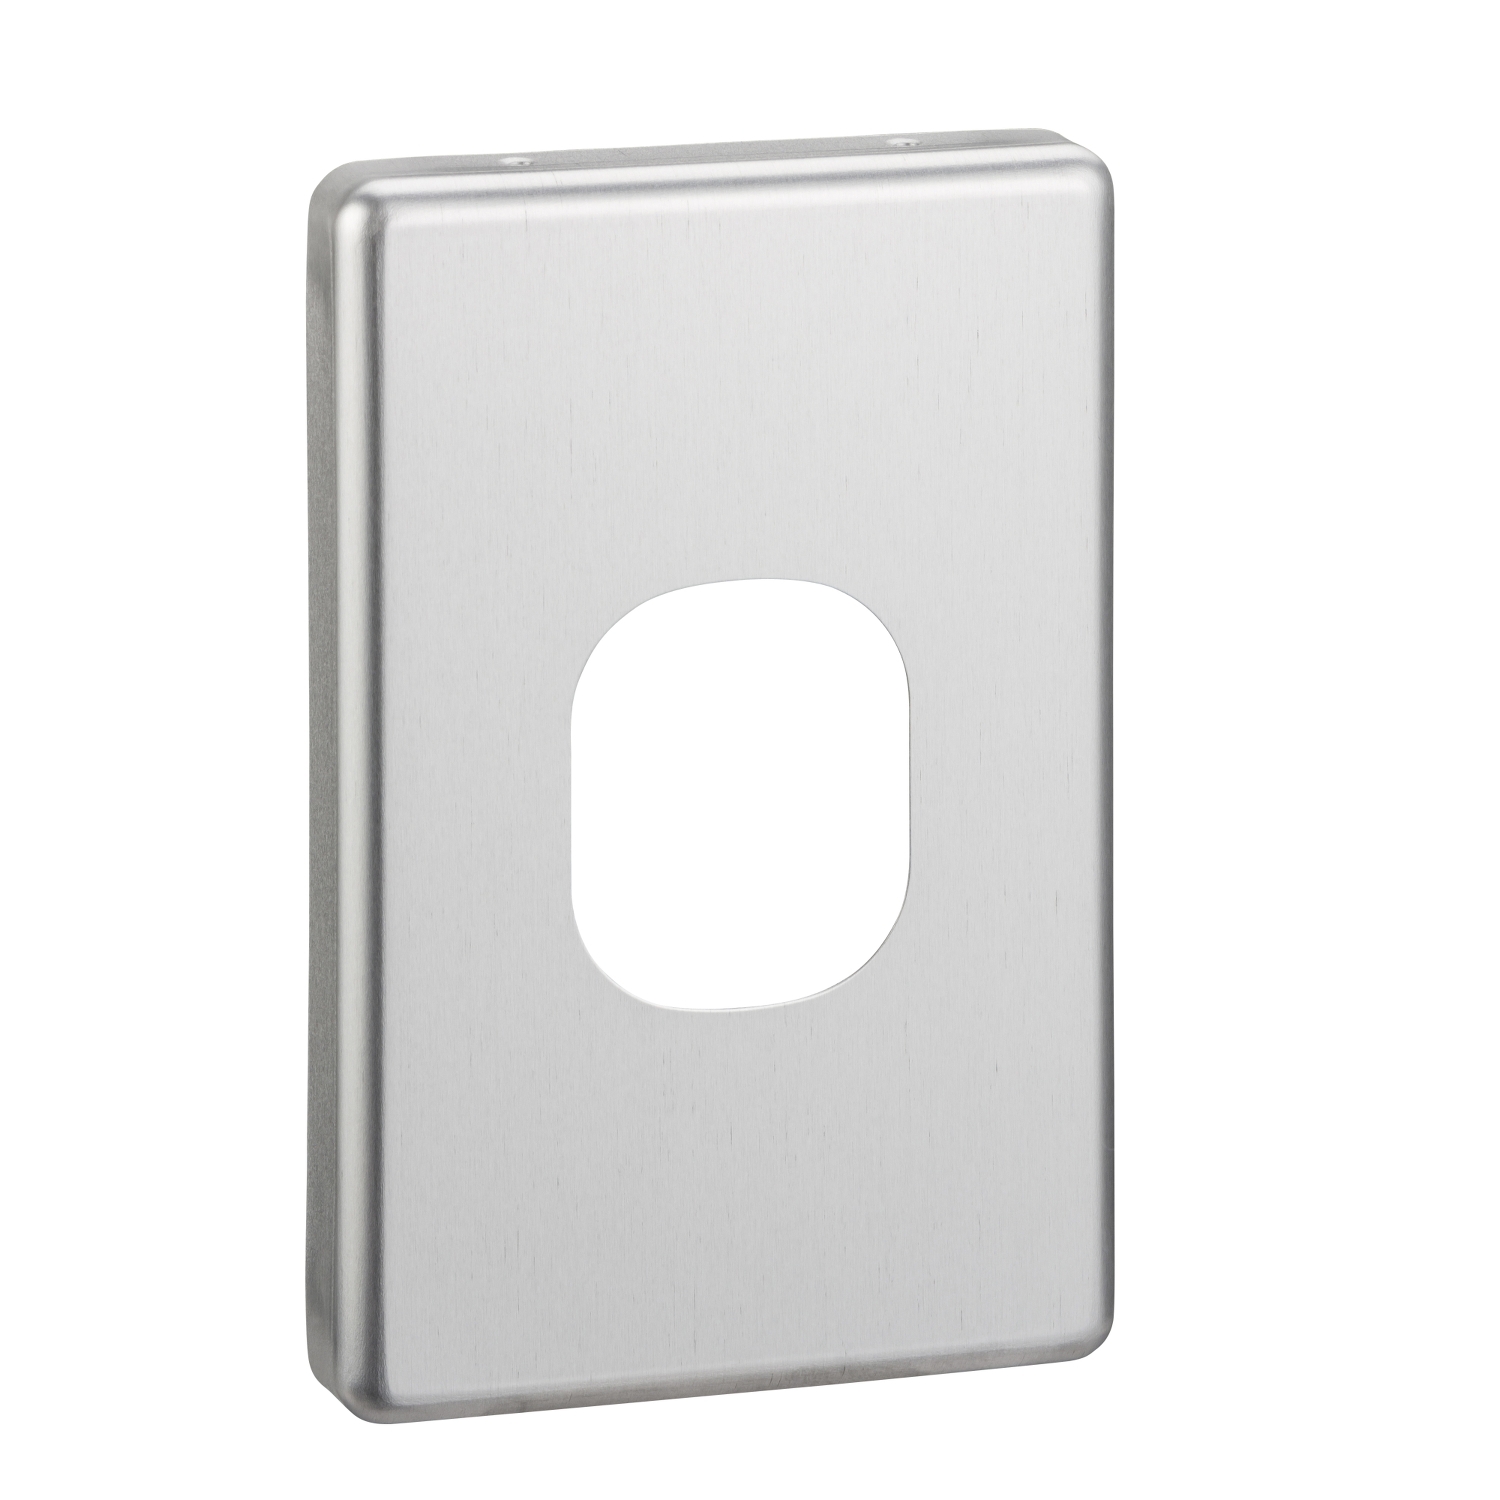 Switch Plate Covers Electric Range, 40 and 45A Switch Products